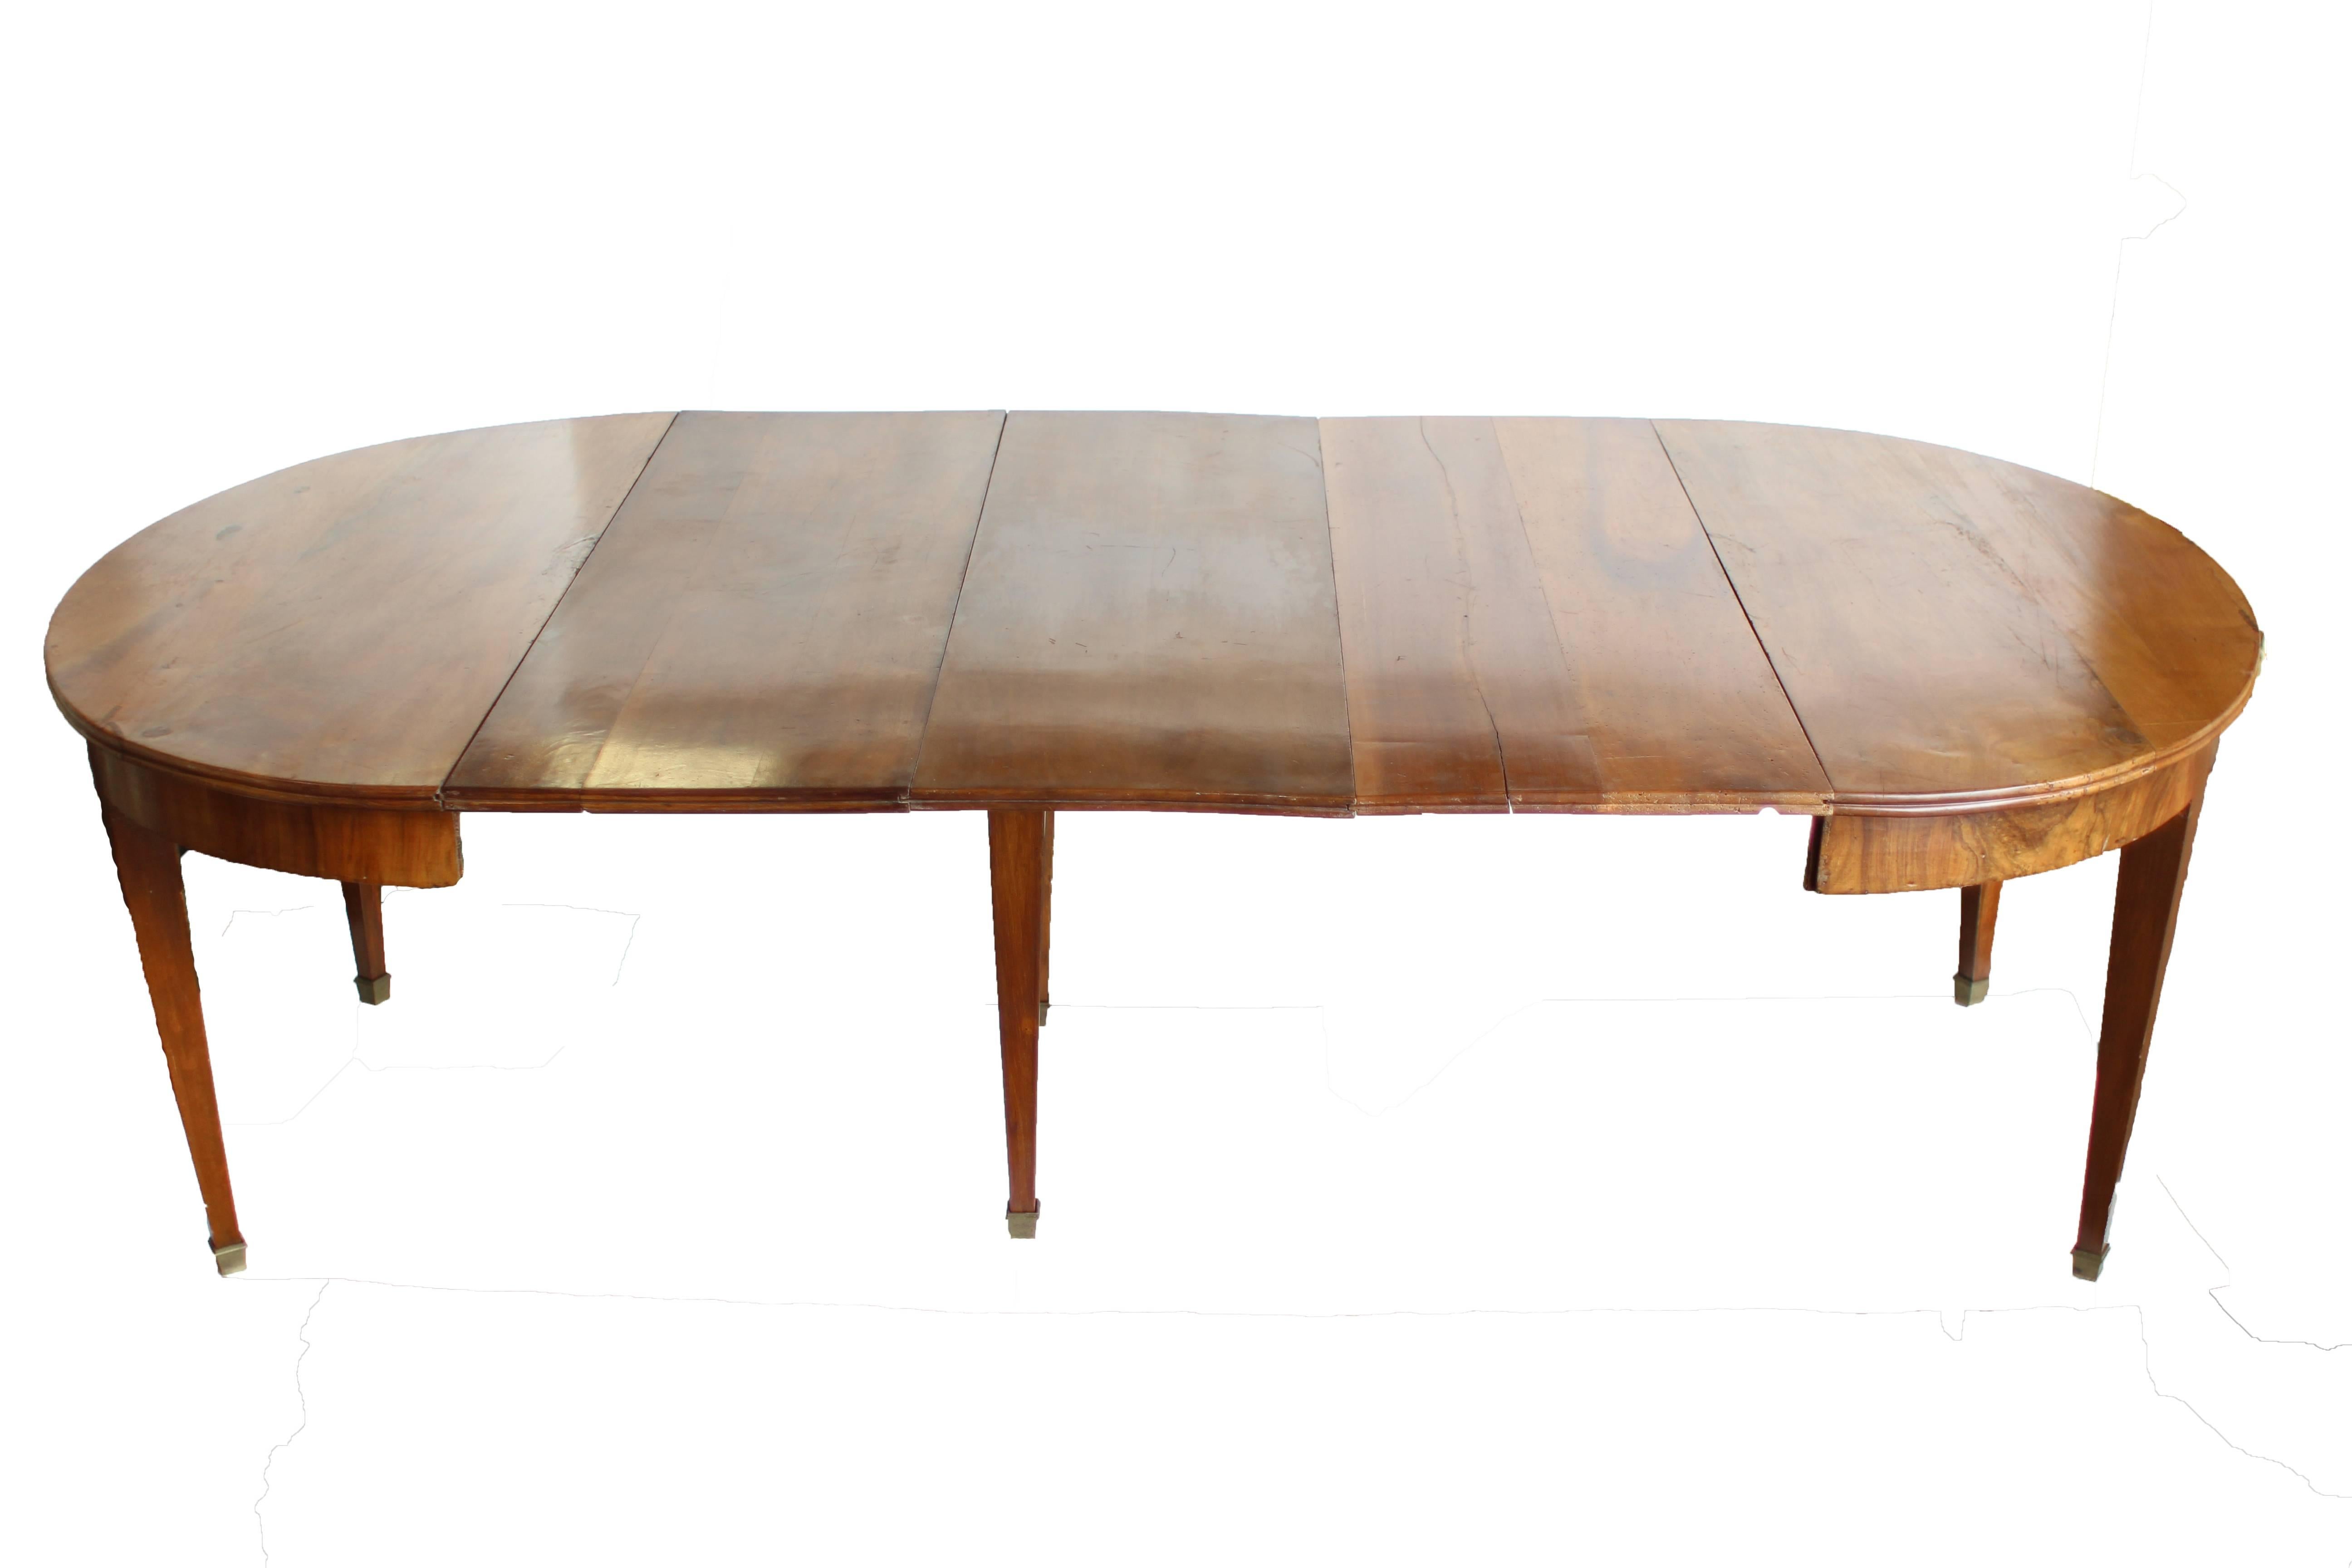 19c Directoire Walnut Dining Table w/ Three Leaves 3